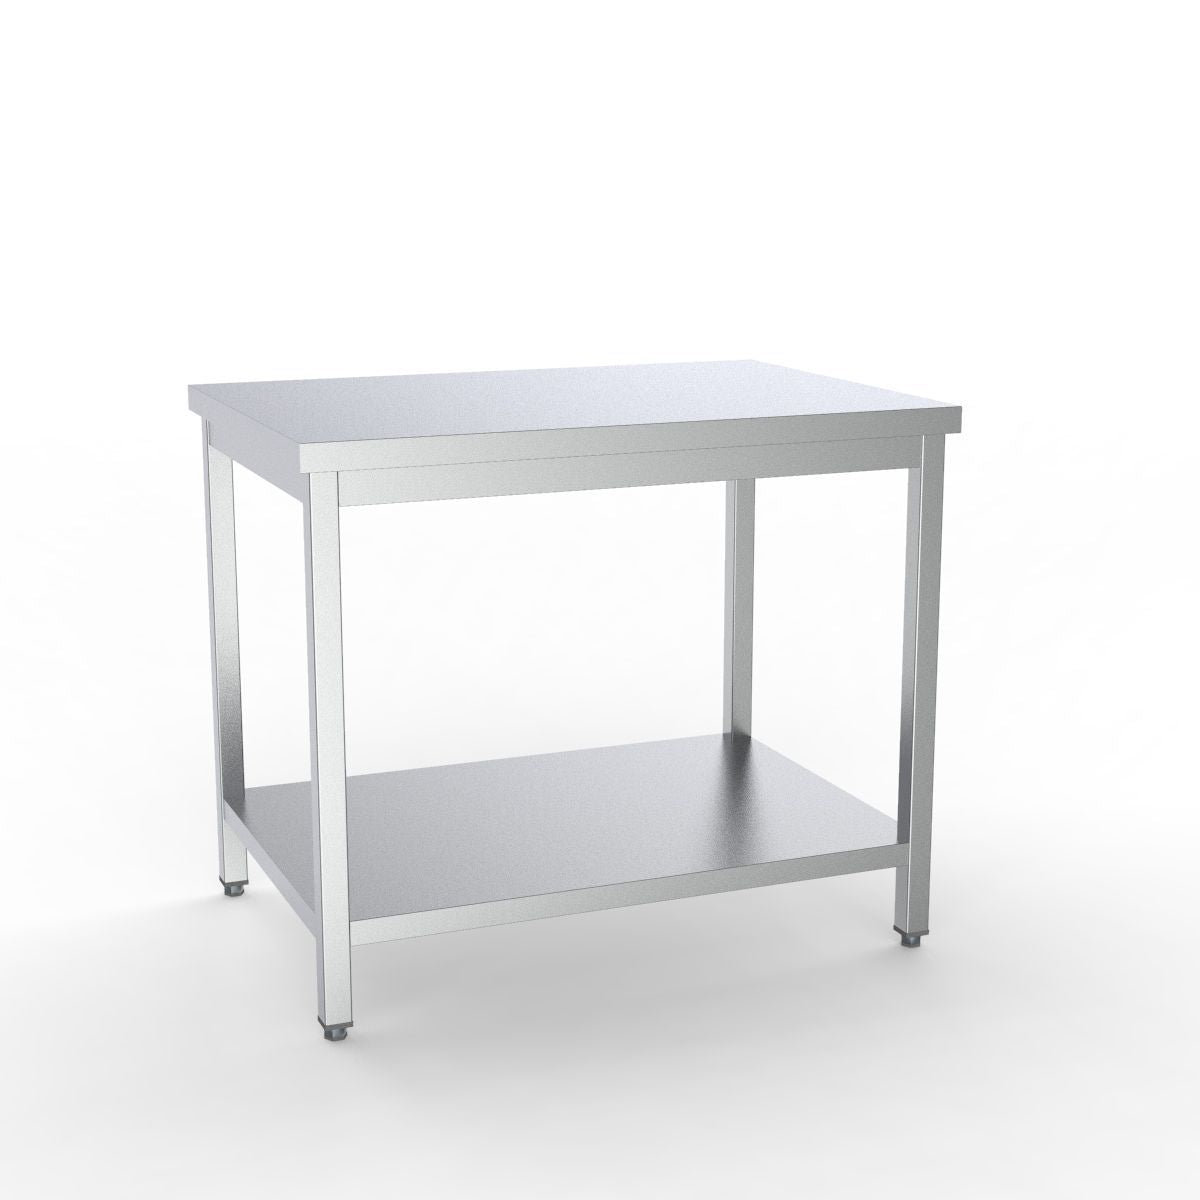 Combisteel Full 430 Stainless Steel 700 Line Worktable With Shelf 1800mm Wide - 7333.0086